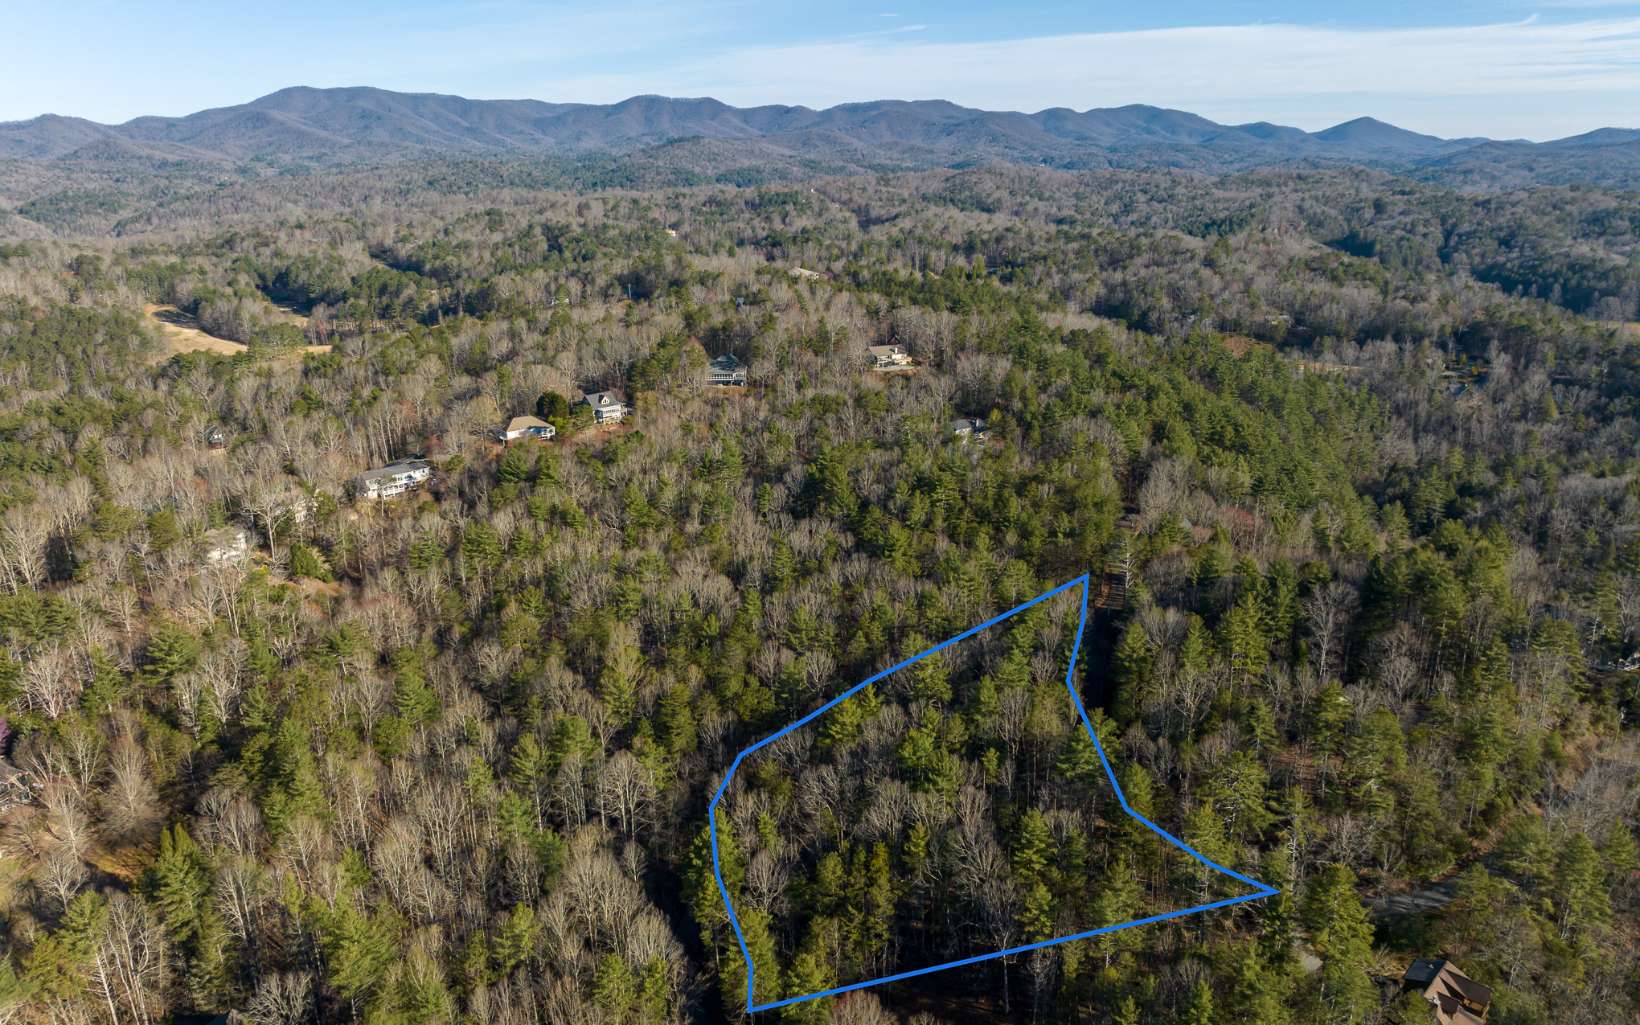 Build your next home on this ideal 1.17 acre lot that sits on the corner of Sapulpa Ct and Neshoba Ct E, in Buckhorn Estates, located in the beautiful north Georgia mountains. You'll love the peace and quiet of living in a wildlife sanctuary, surrounded by the beauty of the Chattahoochee National Forest. Neighborhood amenities include the River park on the Ellijay River, a dog park and an 8 acre lake (great for fishing). Attention Golfers - the community is built around the Whitepath Golf Course, which is the only public course in Gilmer county. So, bring your house plans, your clubs & your cart and start living the dream! *HOA fees $225/year* **Gilmer County offers "no school tax" for full time residents over the age of 65.**